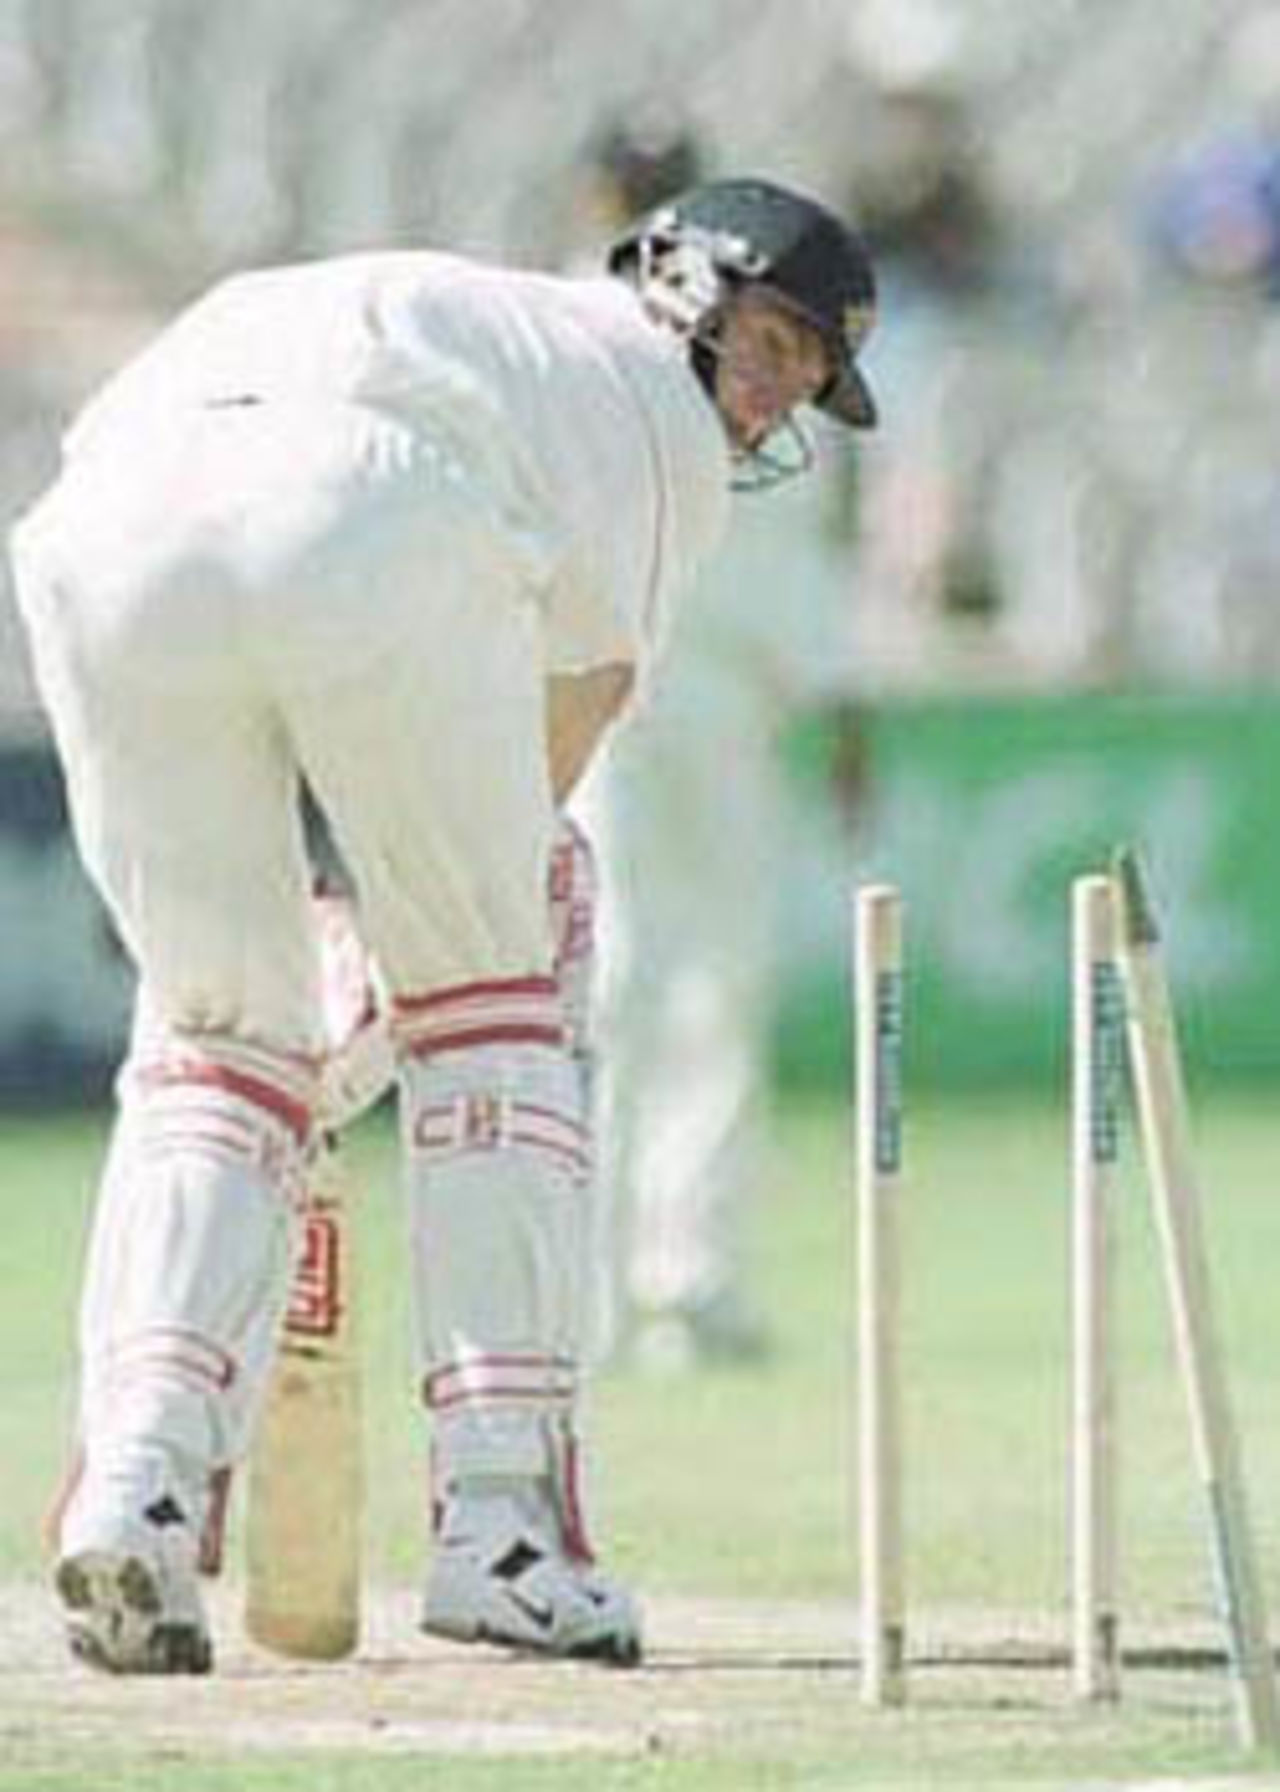 Mike Smethurst is bowled out by Saggers, PPP healthcare County Championship Division One, 2000, Lancashire v Kent, Old Trafford, Manchester, 17-20 August 2000(Day 3).